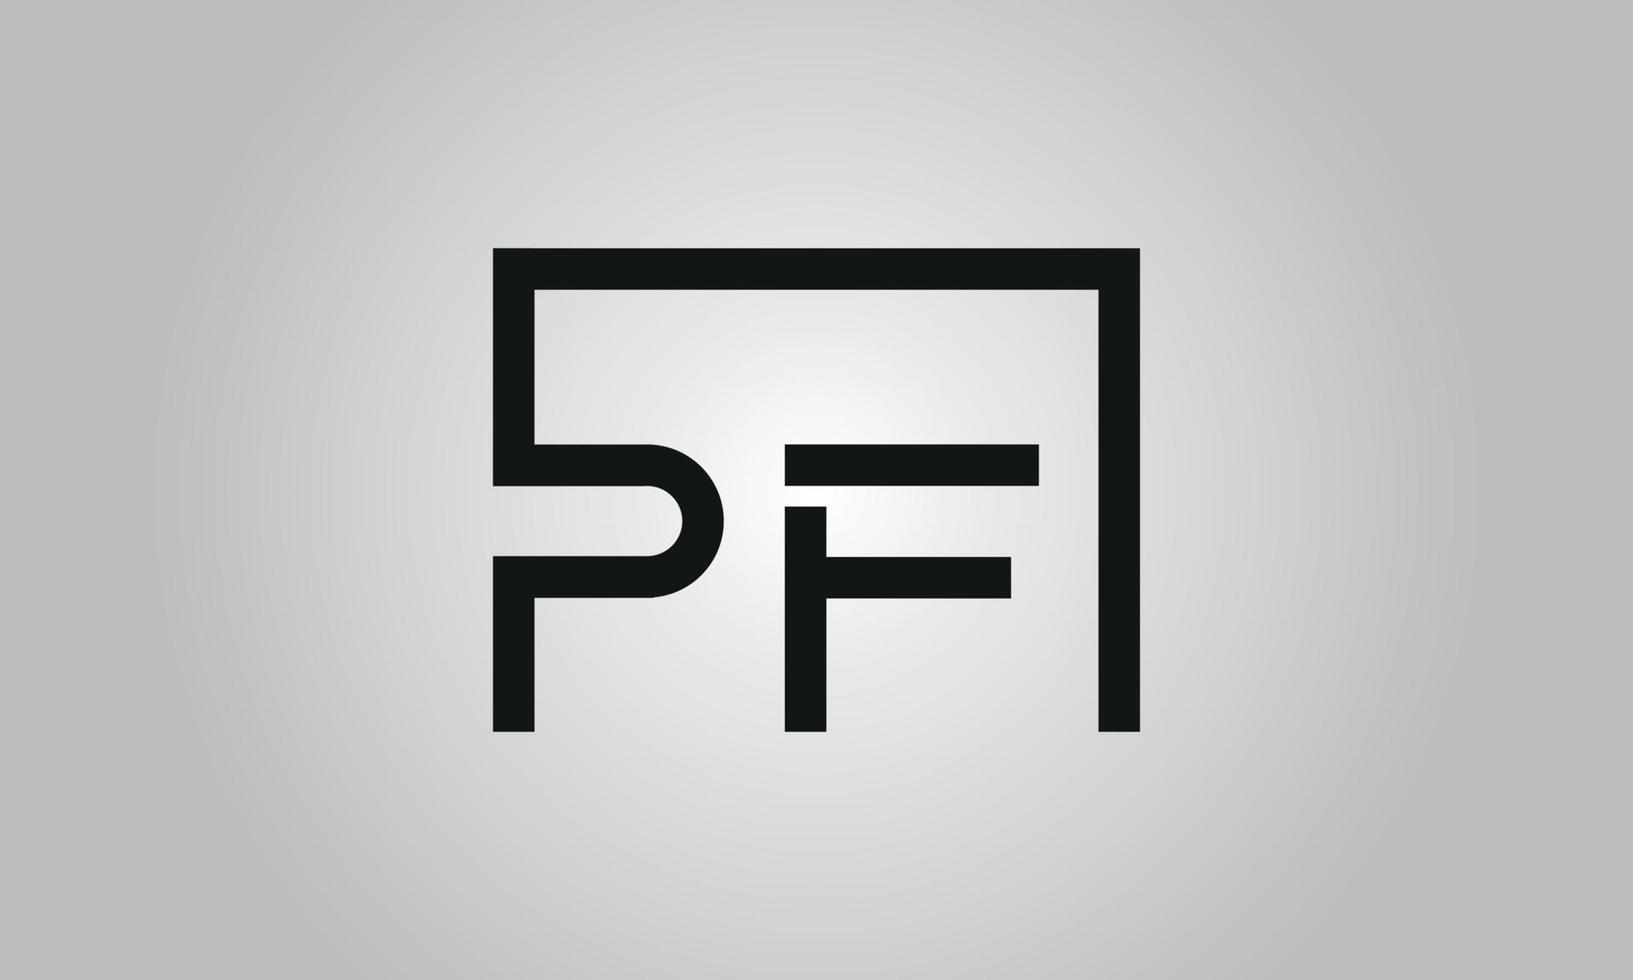 Letter PF logo design. PF logo with square shape in black colors vector free vector template.